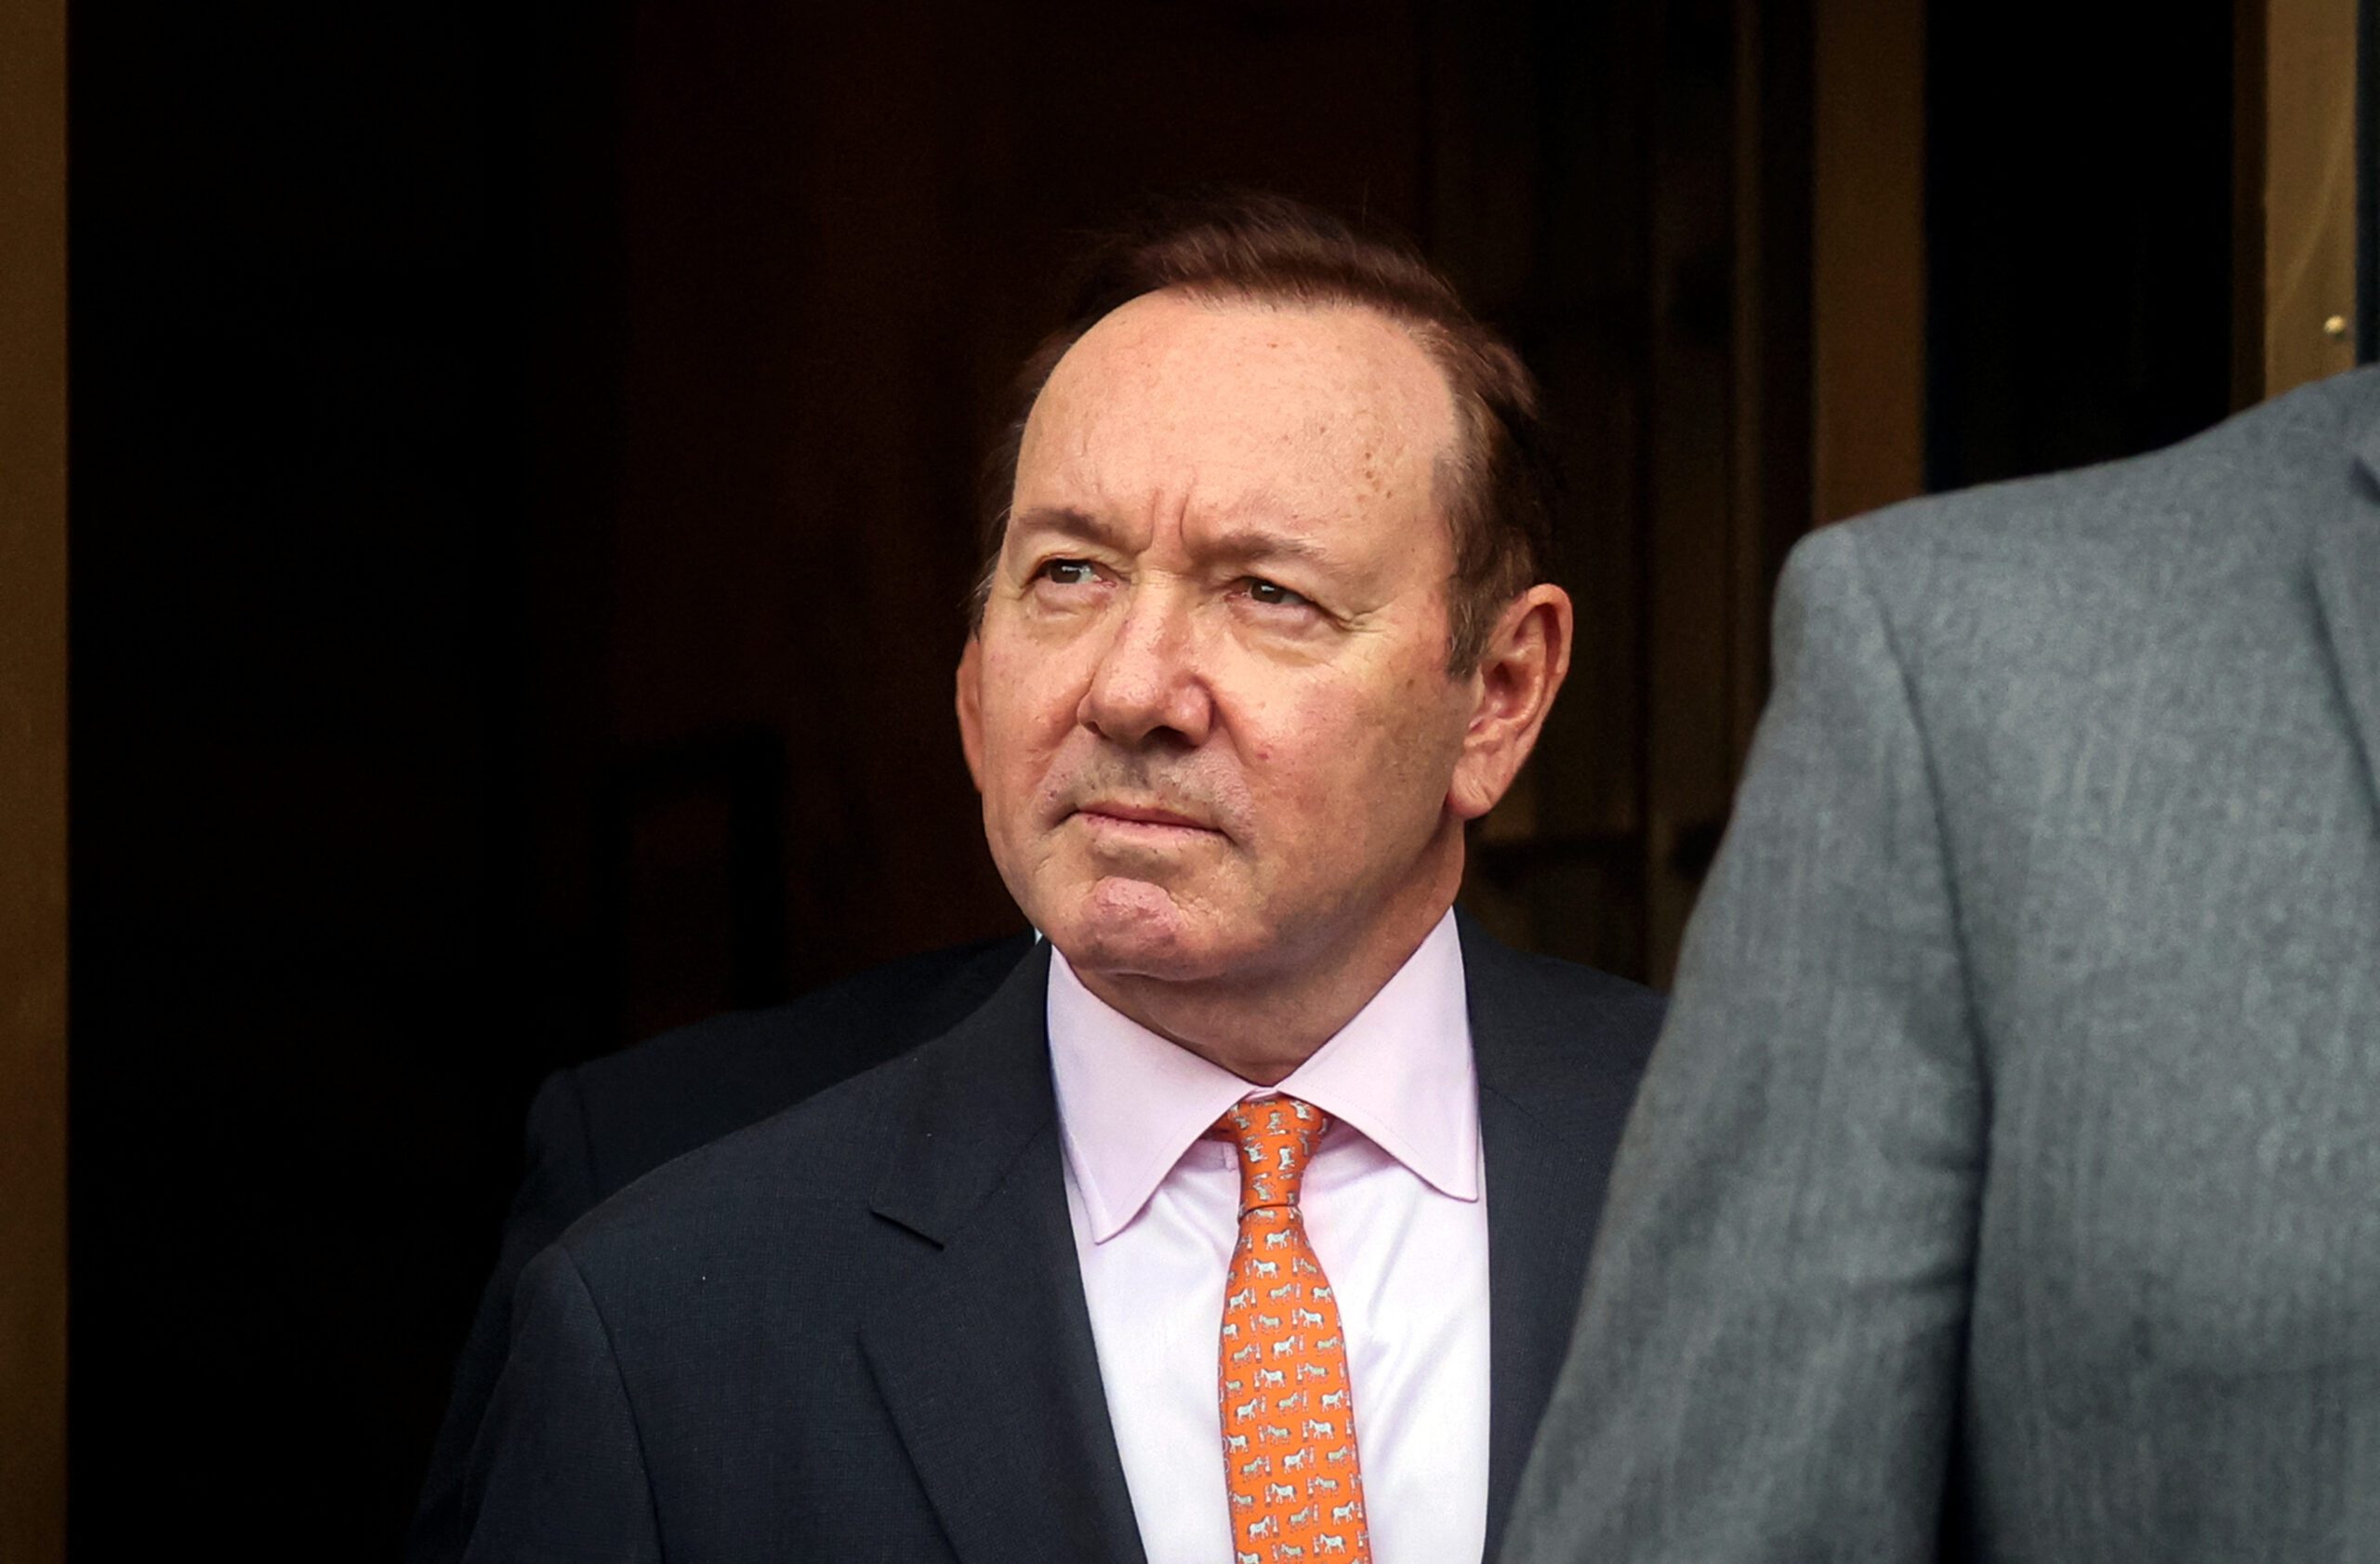 Actor Kevin Spacey faces more sexual assault charges in Britain